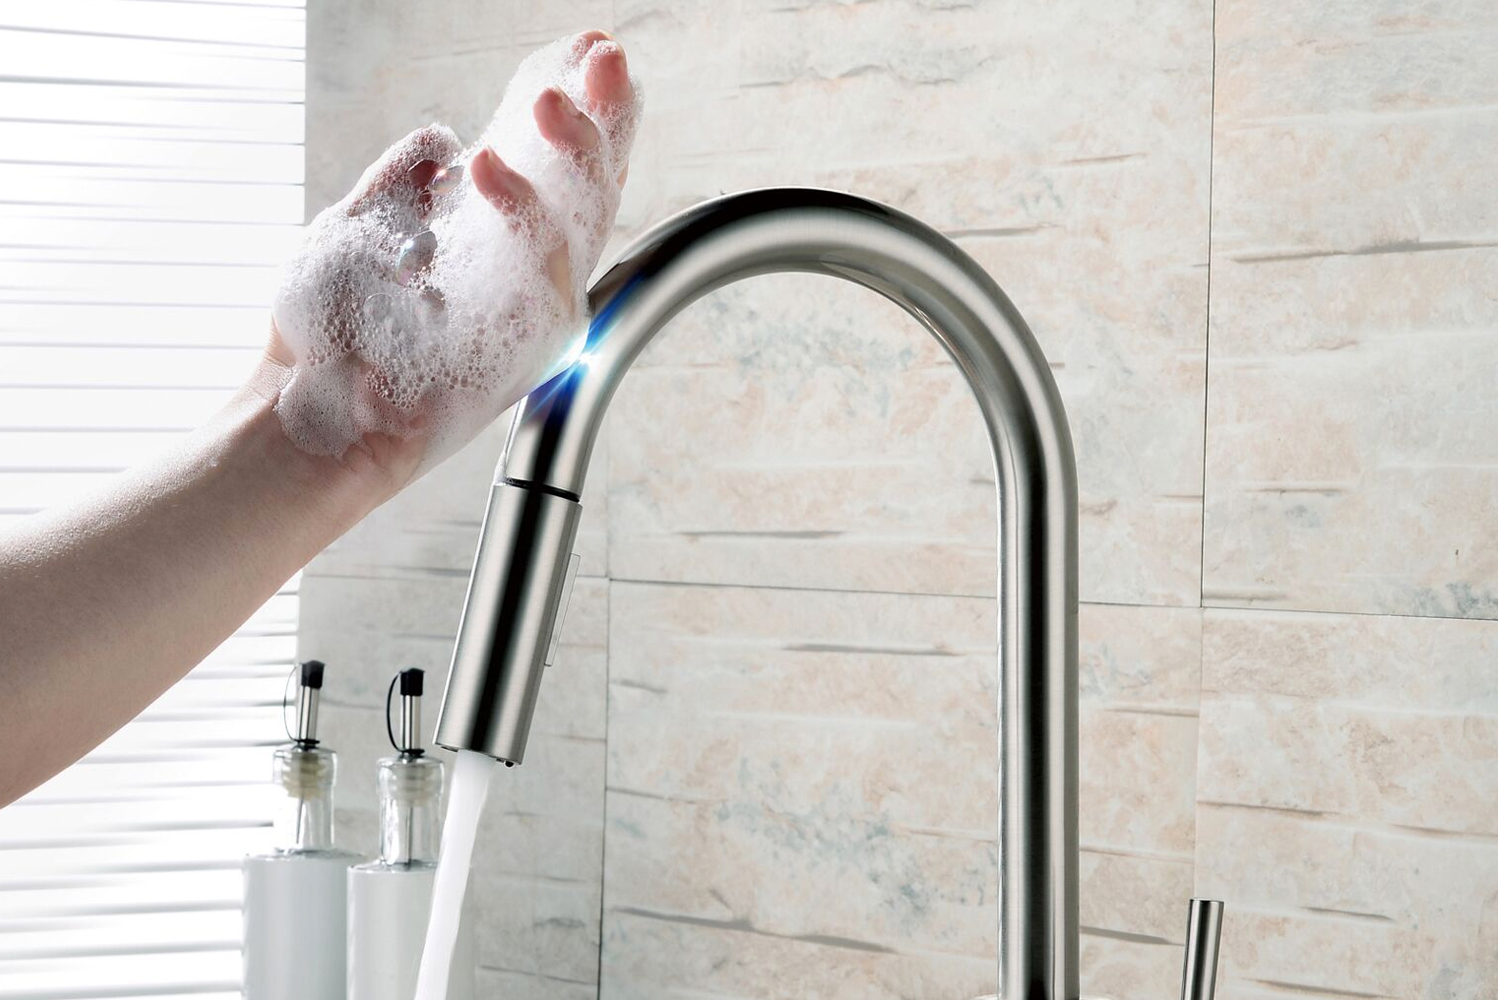 Lenova launched the TKO Touch faucets 